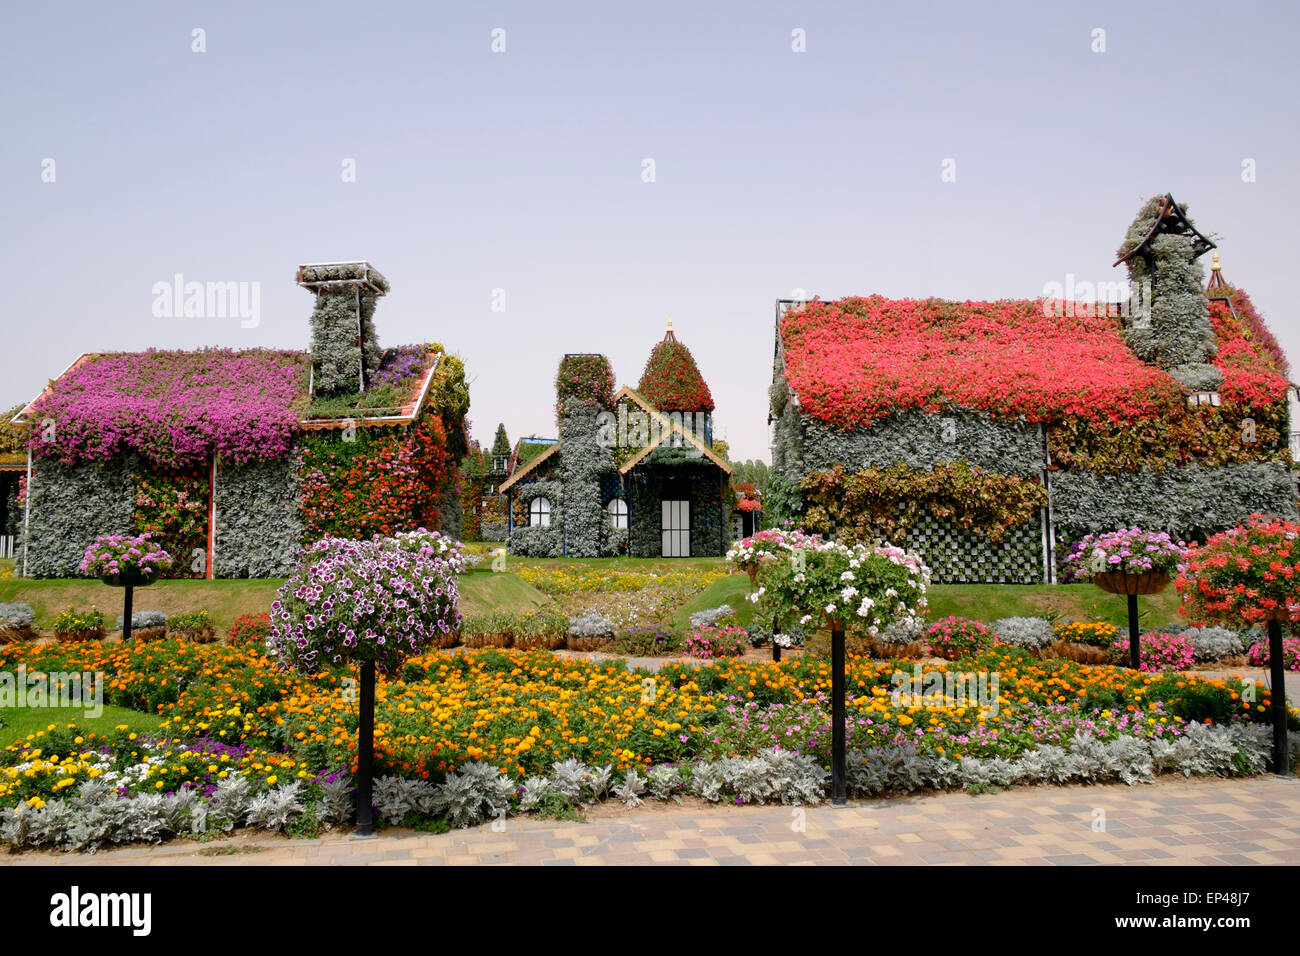 Houses covered in flowers at Miracle Garden Dubai United Arab Emirates Stock Photo